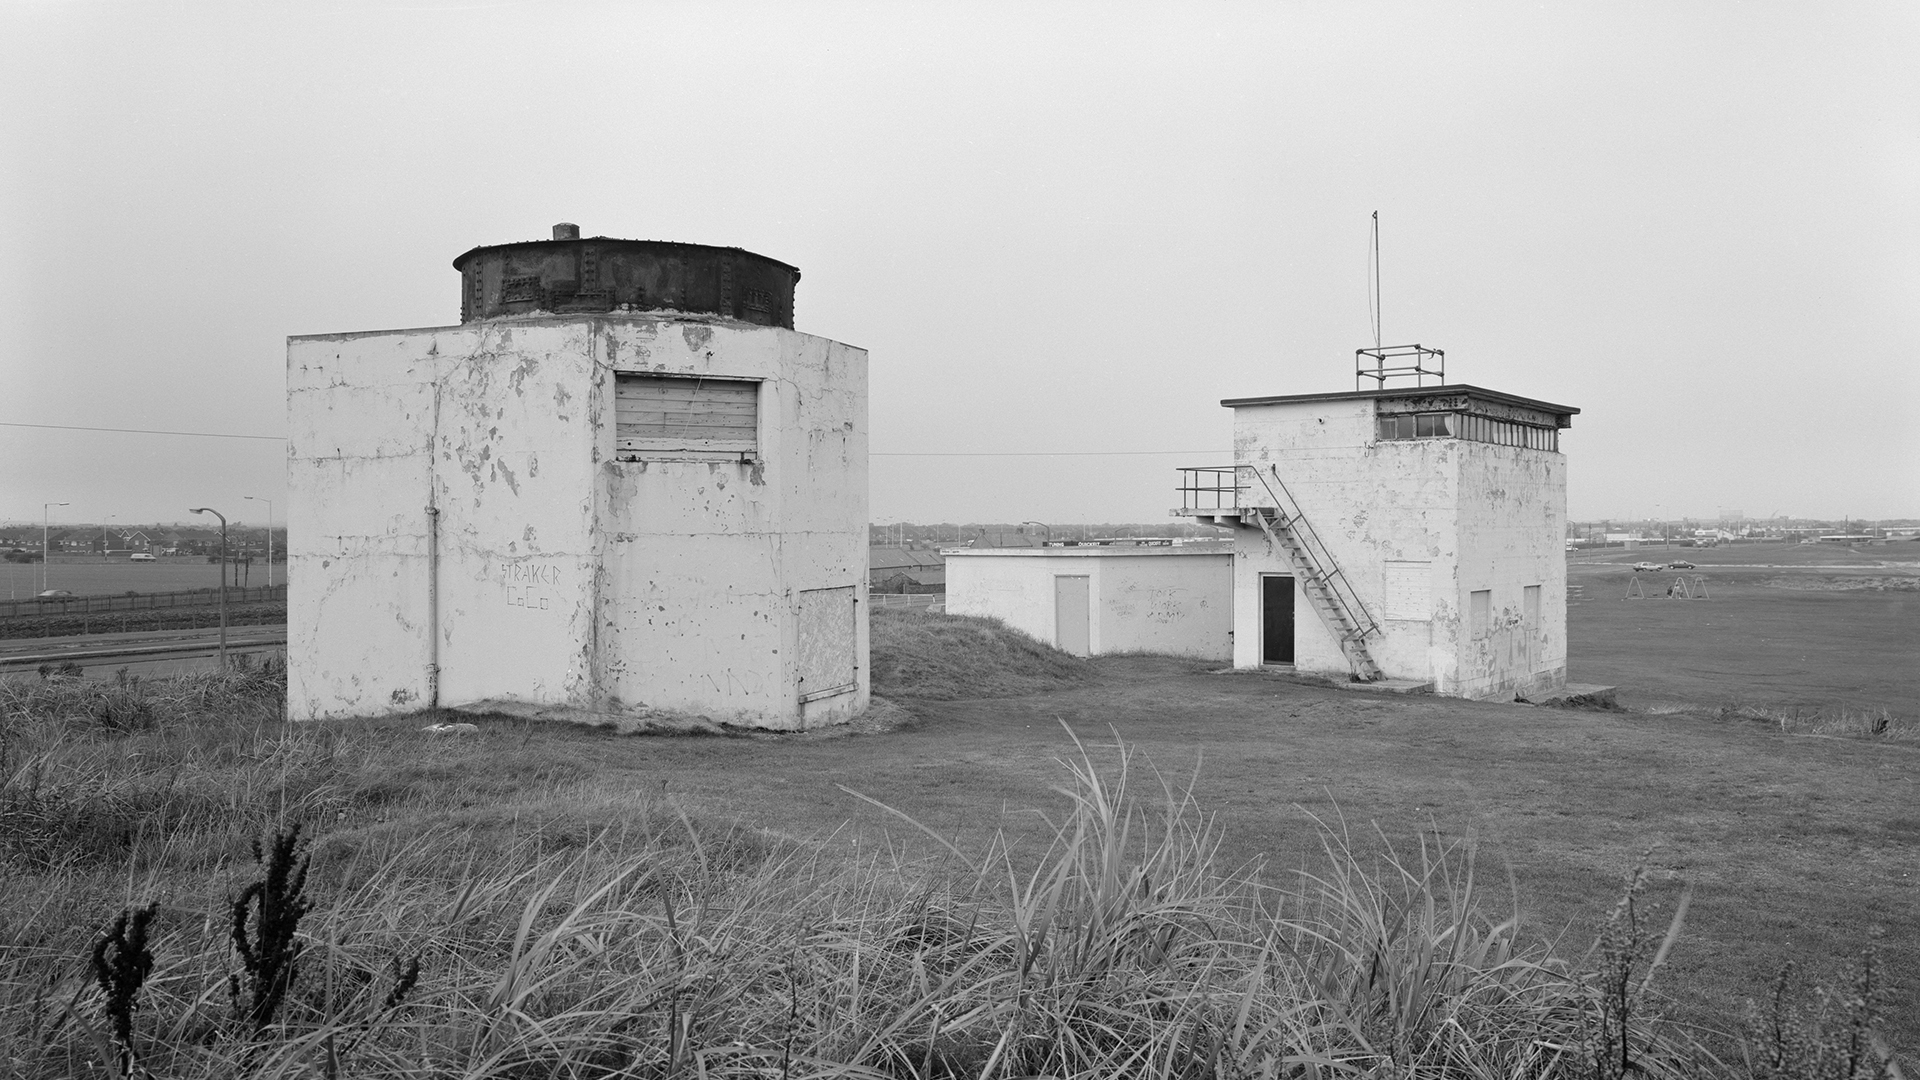 Blyth Battery, Northumberland, built in 1916 to defend the port of Blyth and submarine base.  In the foreground is the double storey, angular First World War Battery Observation Post.